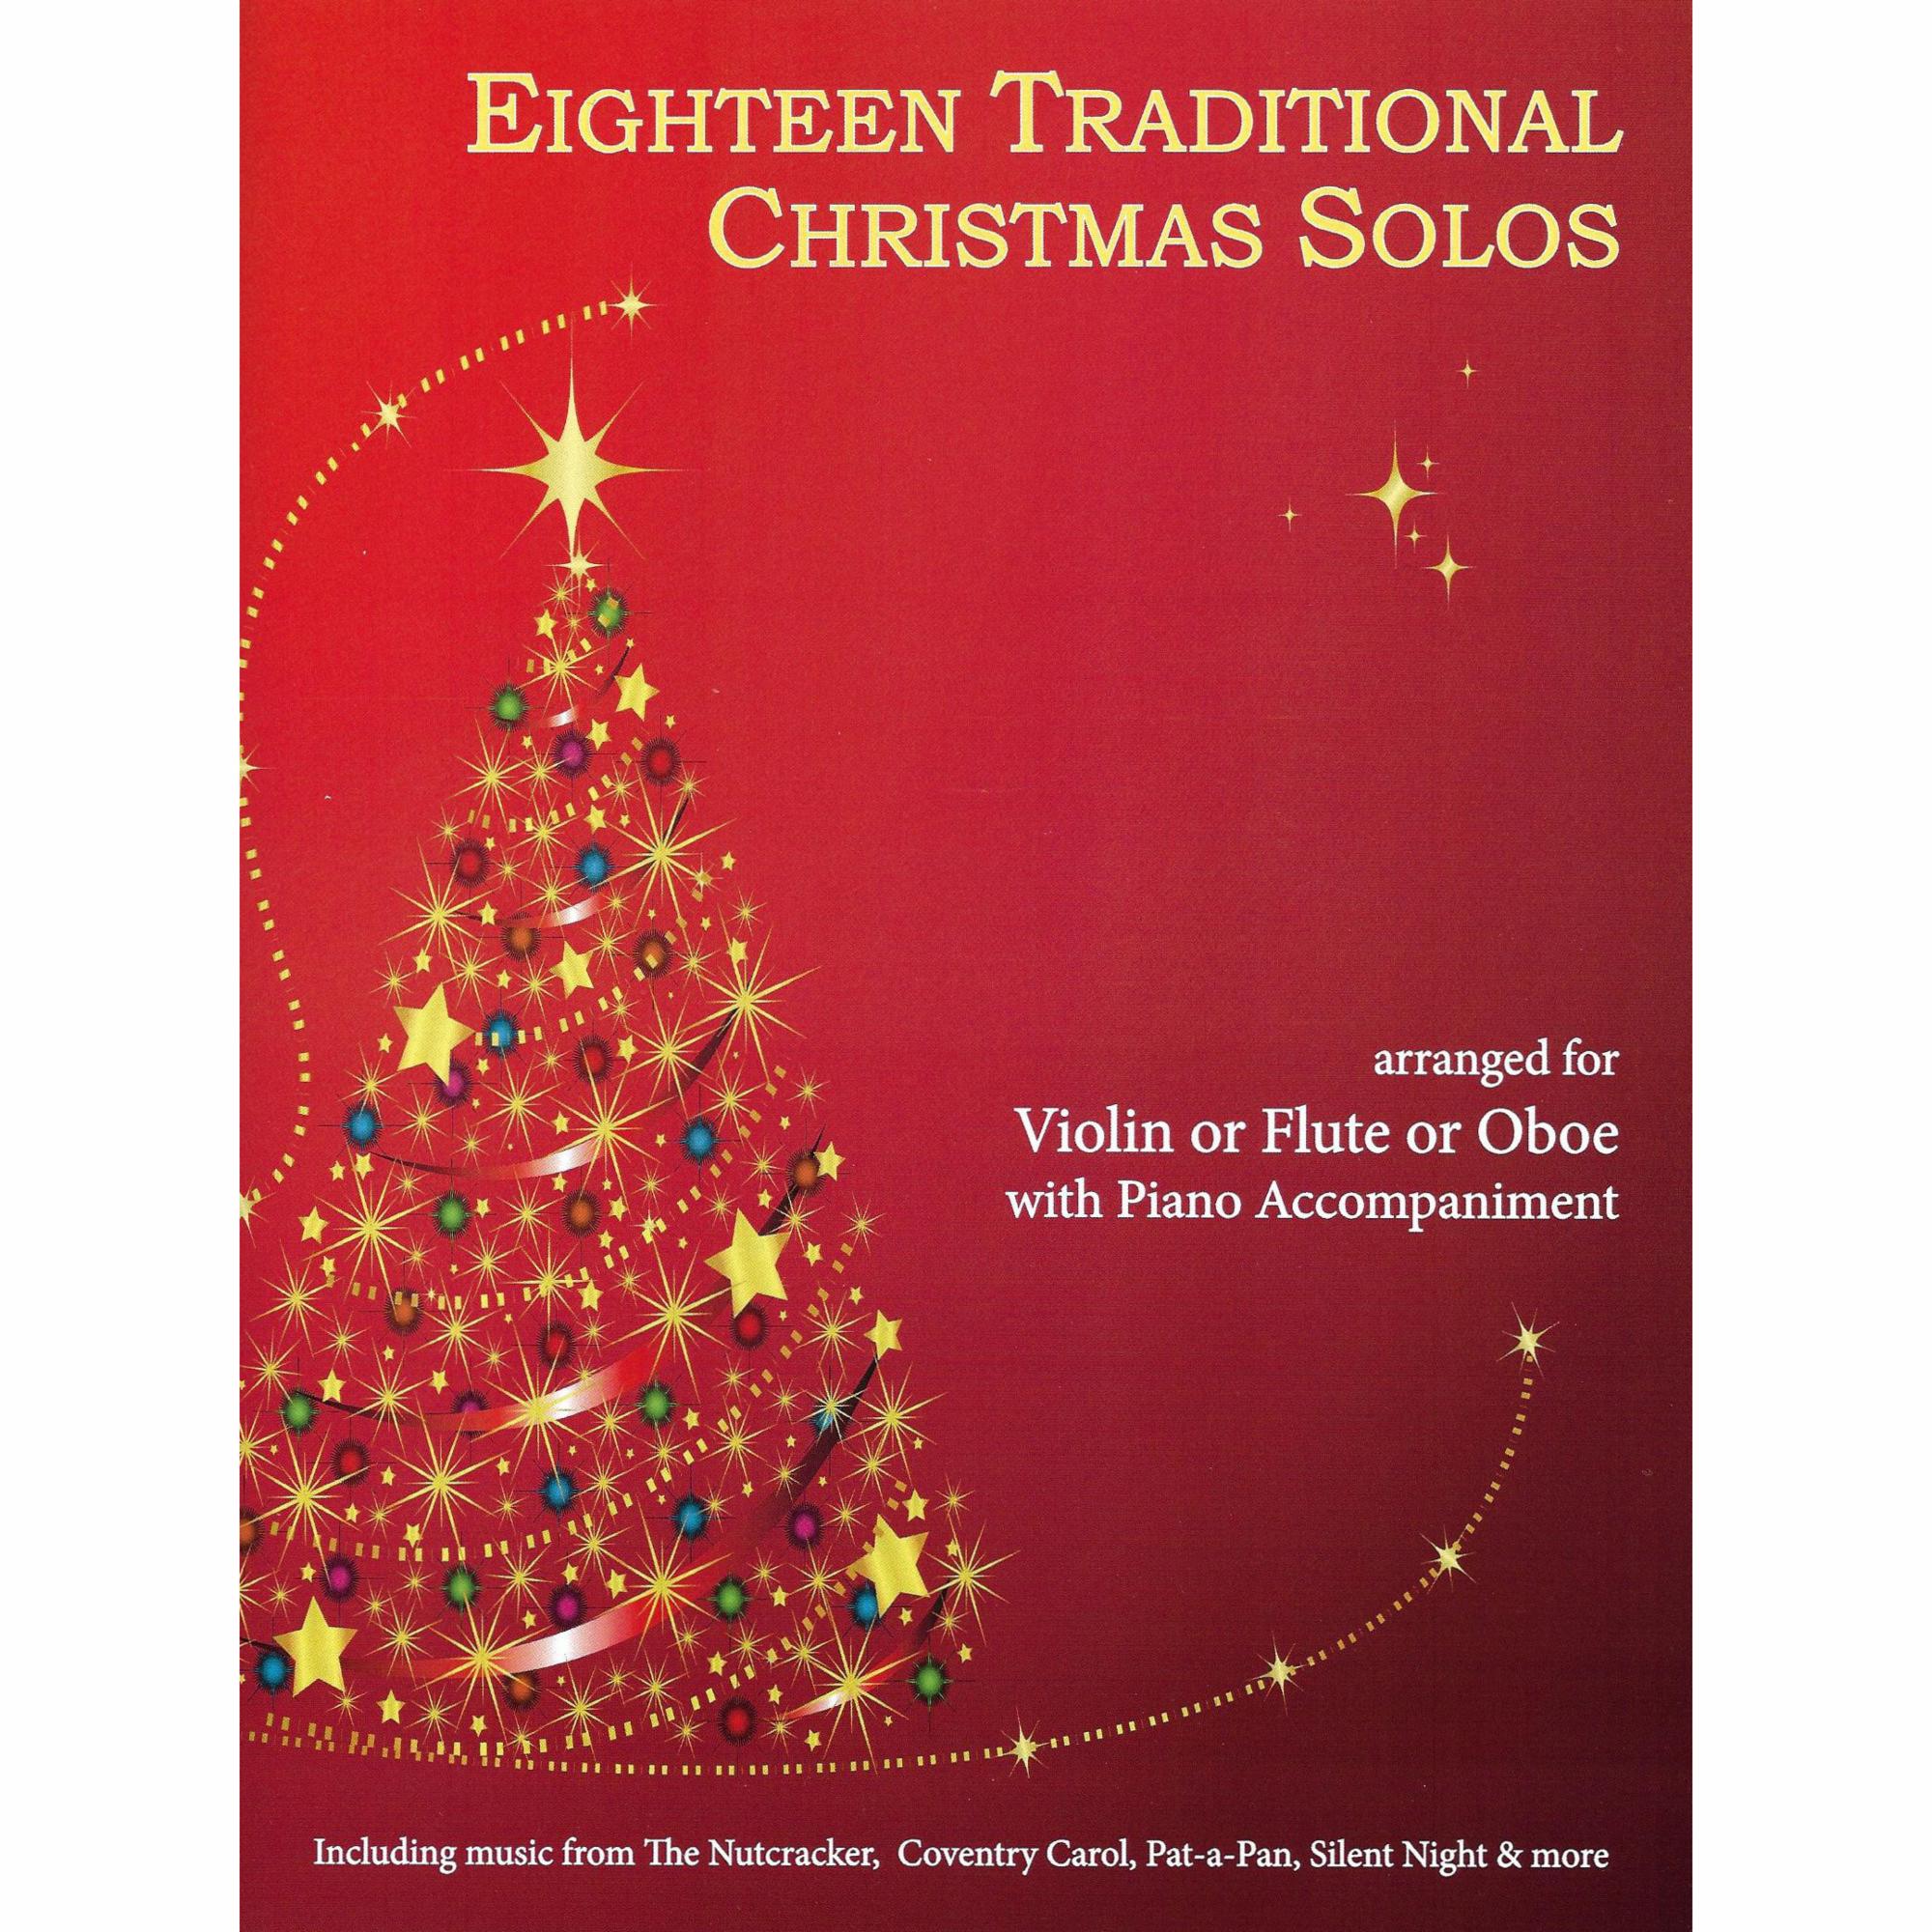 Eighteen Traditional Christmas Solos for Violin, Viola, or Cello and Piano